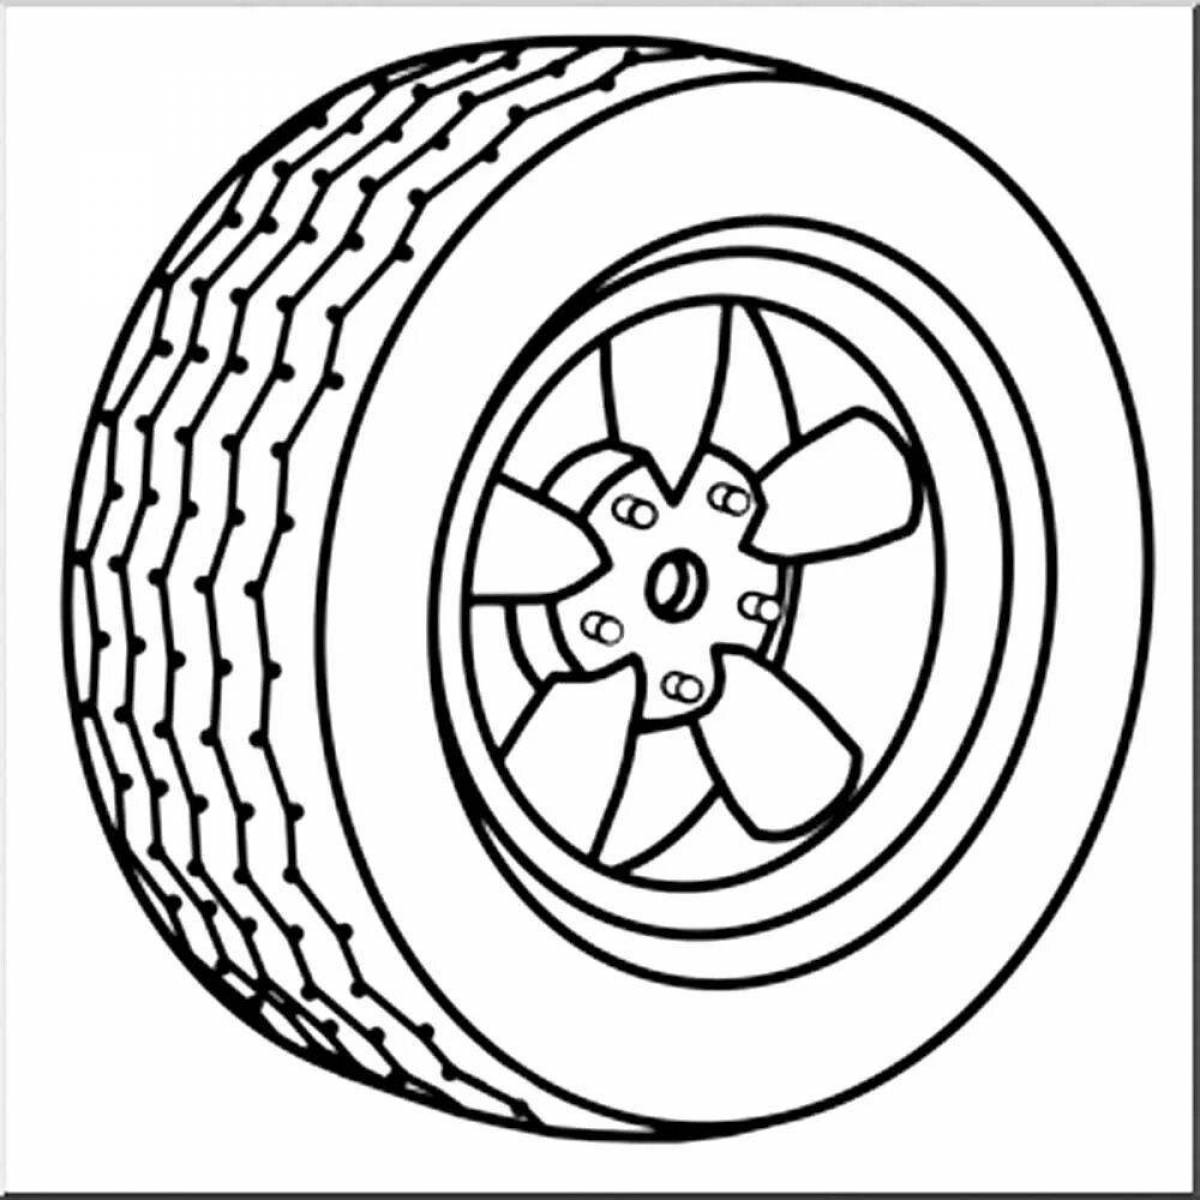 Colorful adorable wheel coloring page for kids